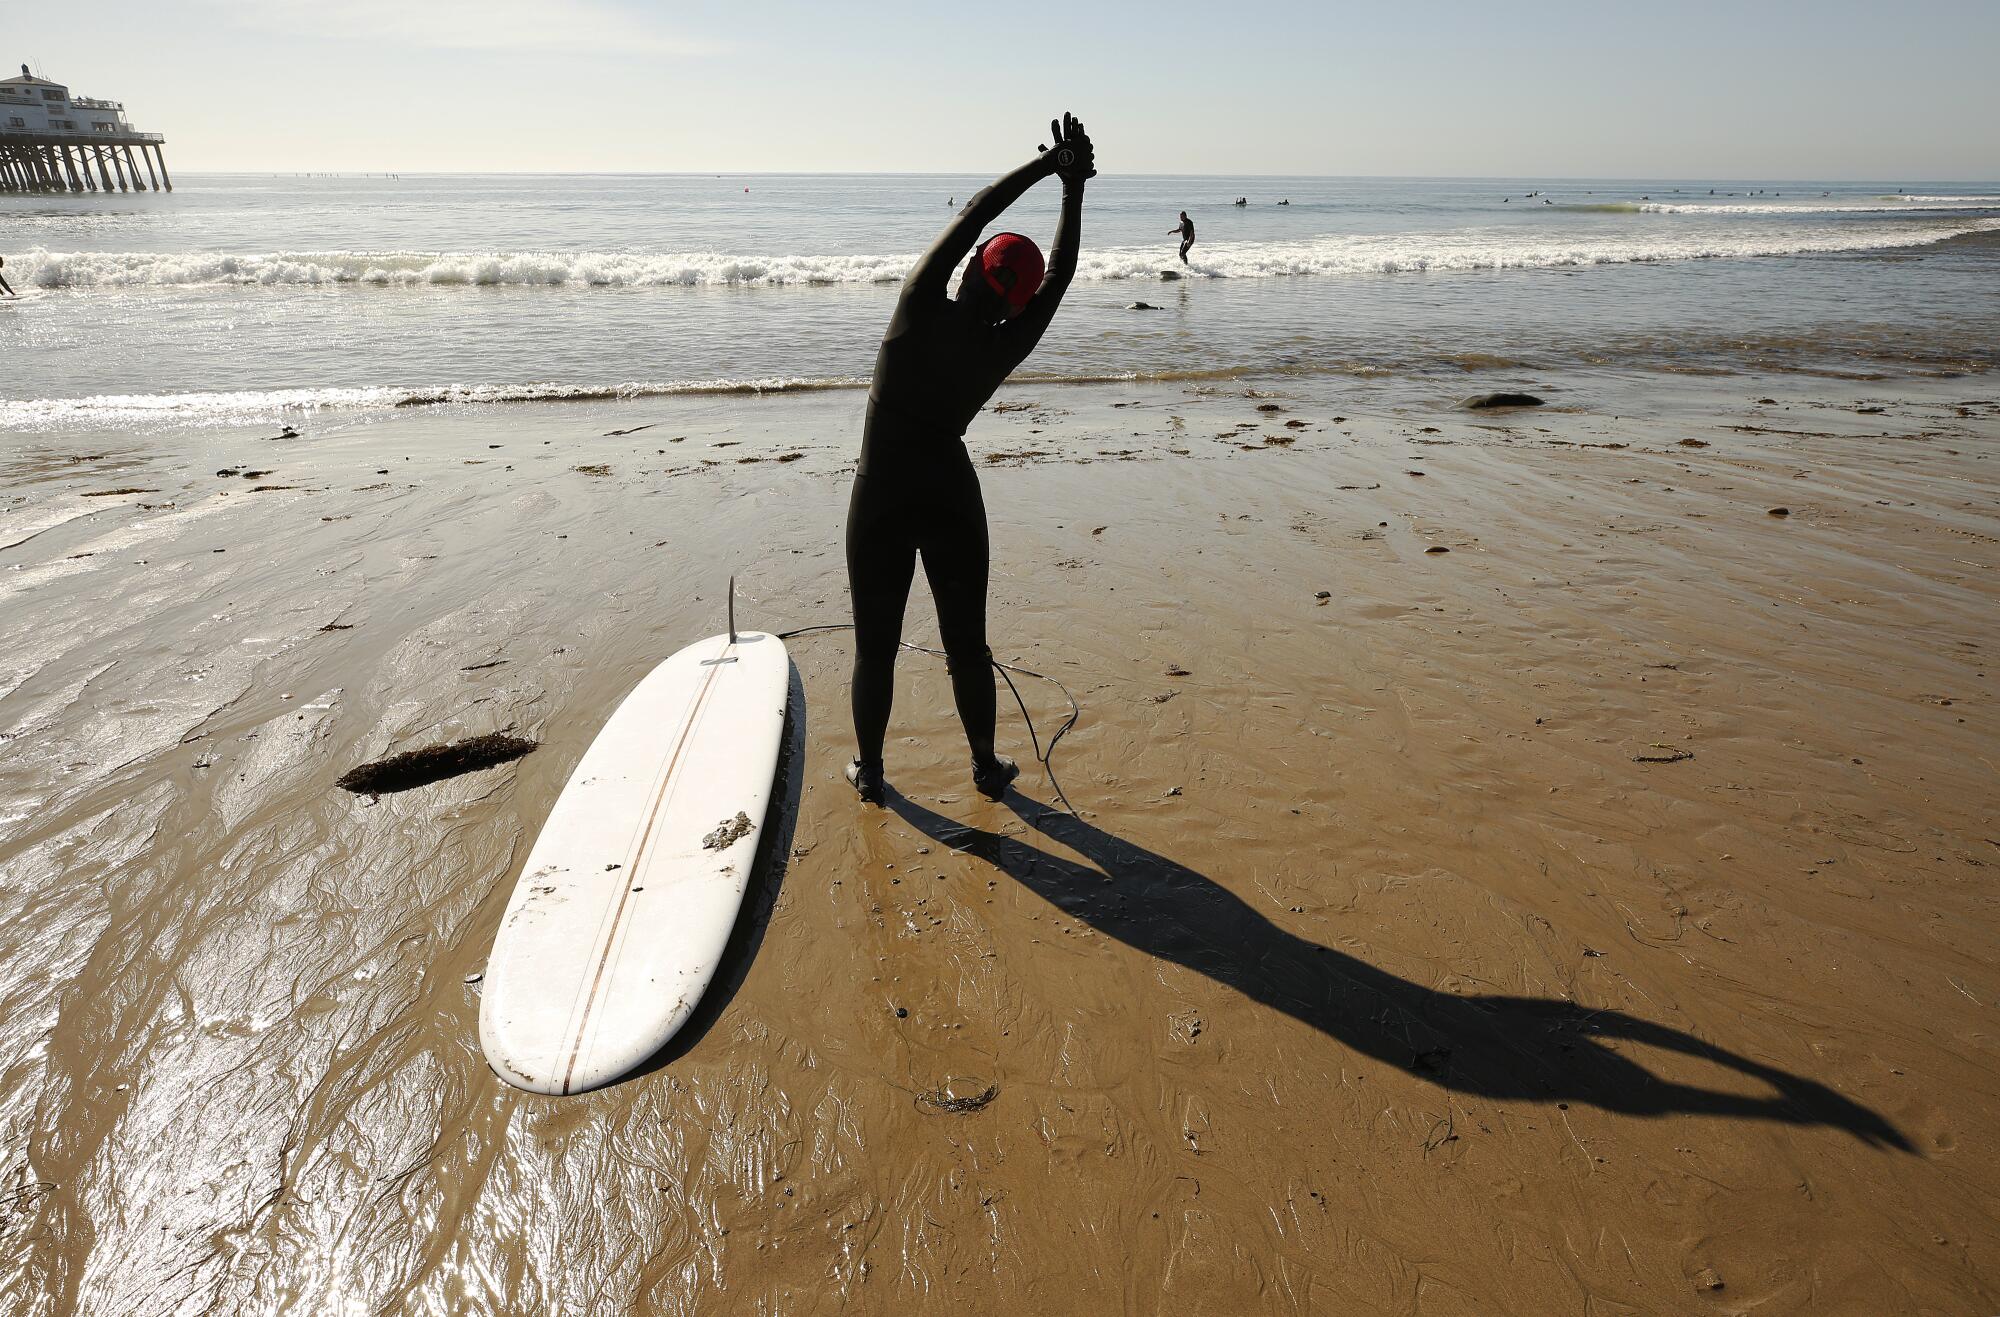 Maria Shen, who began surfing six years ago, stretches before paddling out for a morning session in Malibu.